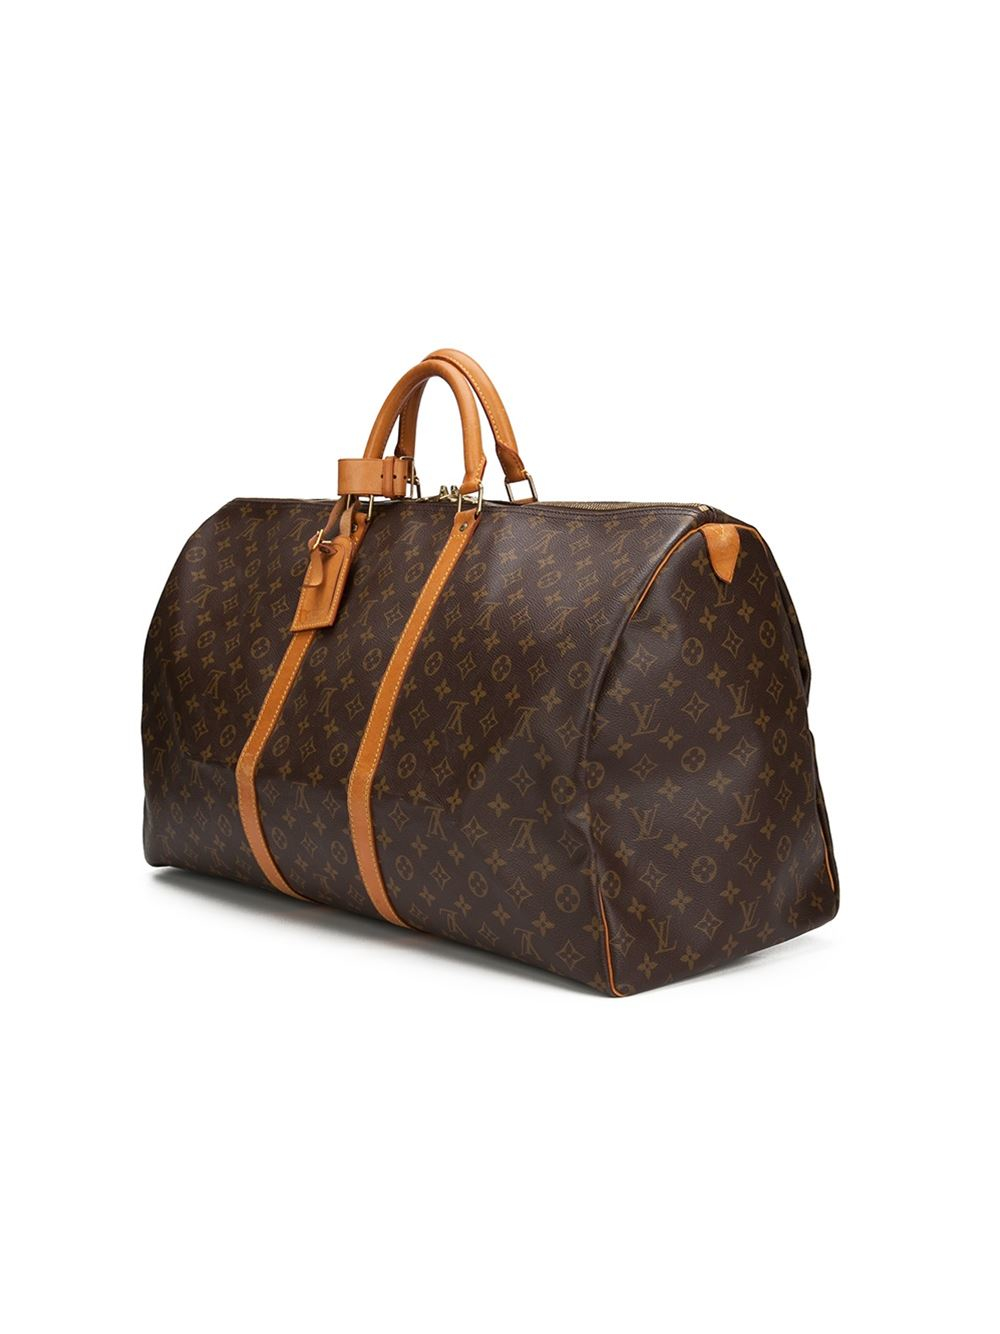 Lyst - Louis Vuitton Large Monogram Holdall in Brown